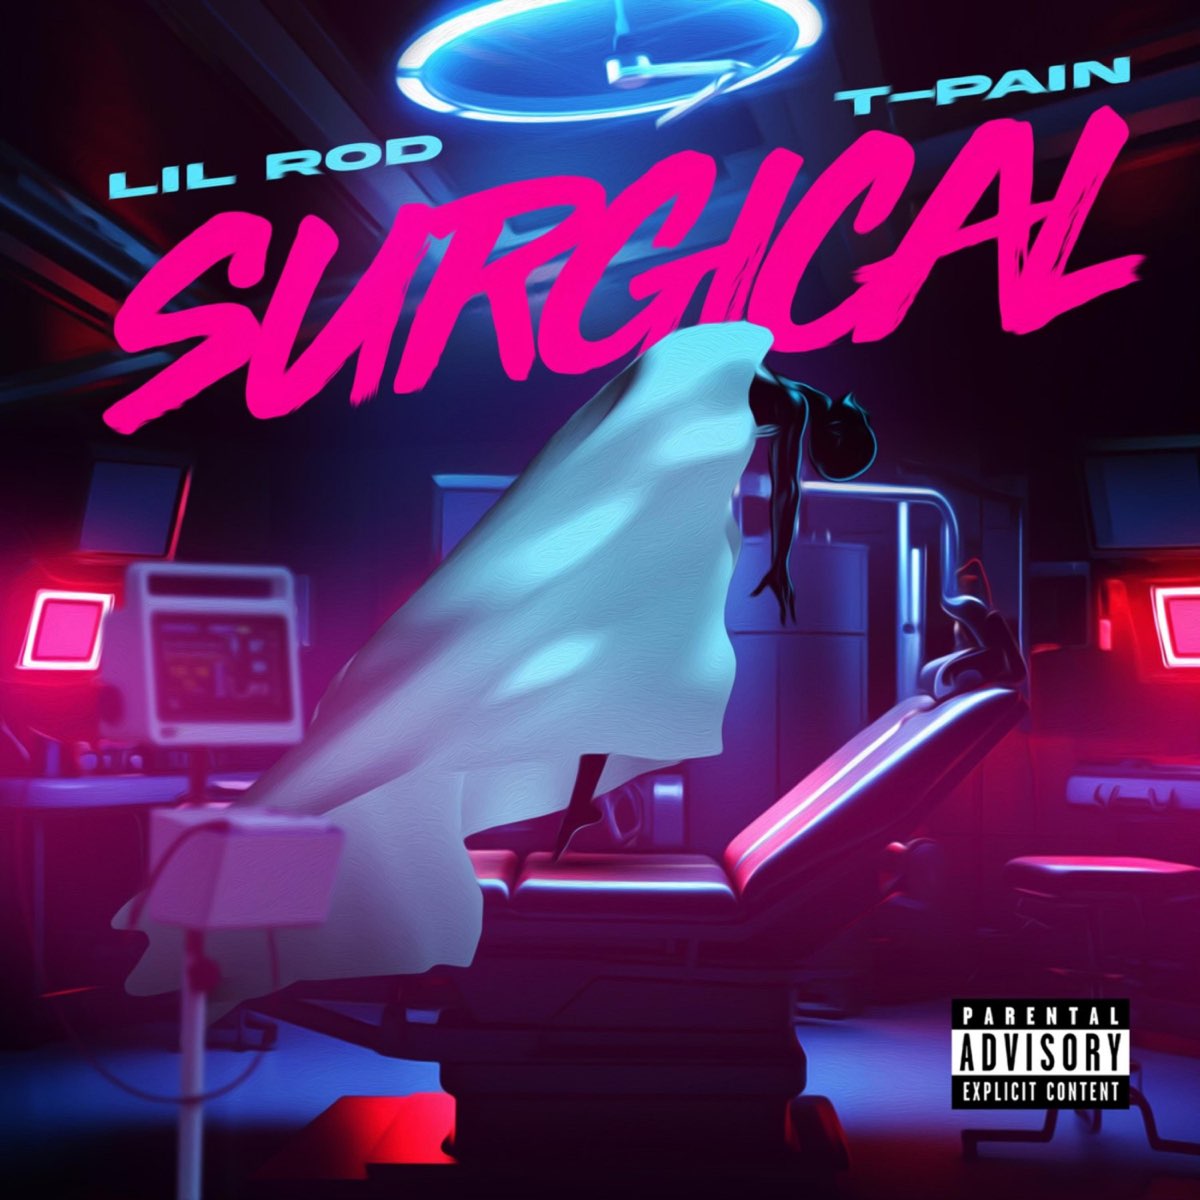 Lil Rod featuring T-Pain — Surgical cover artwork